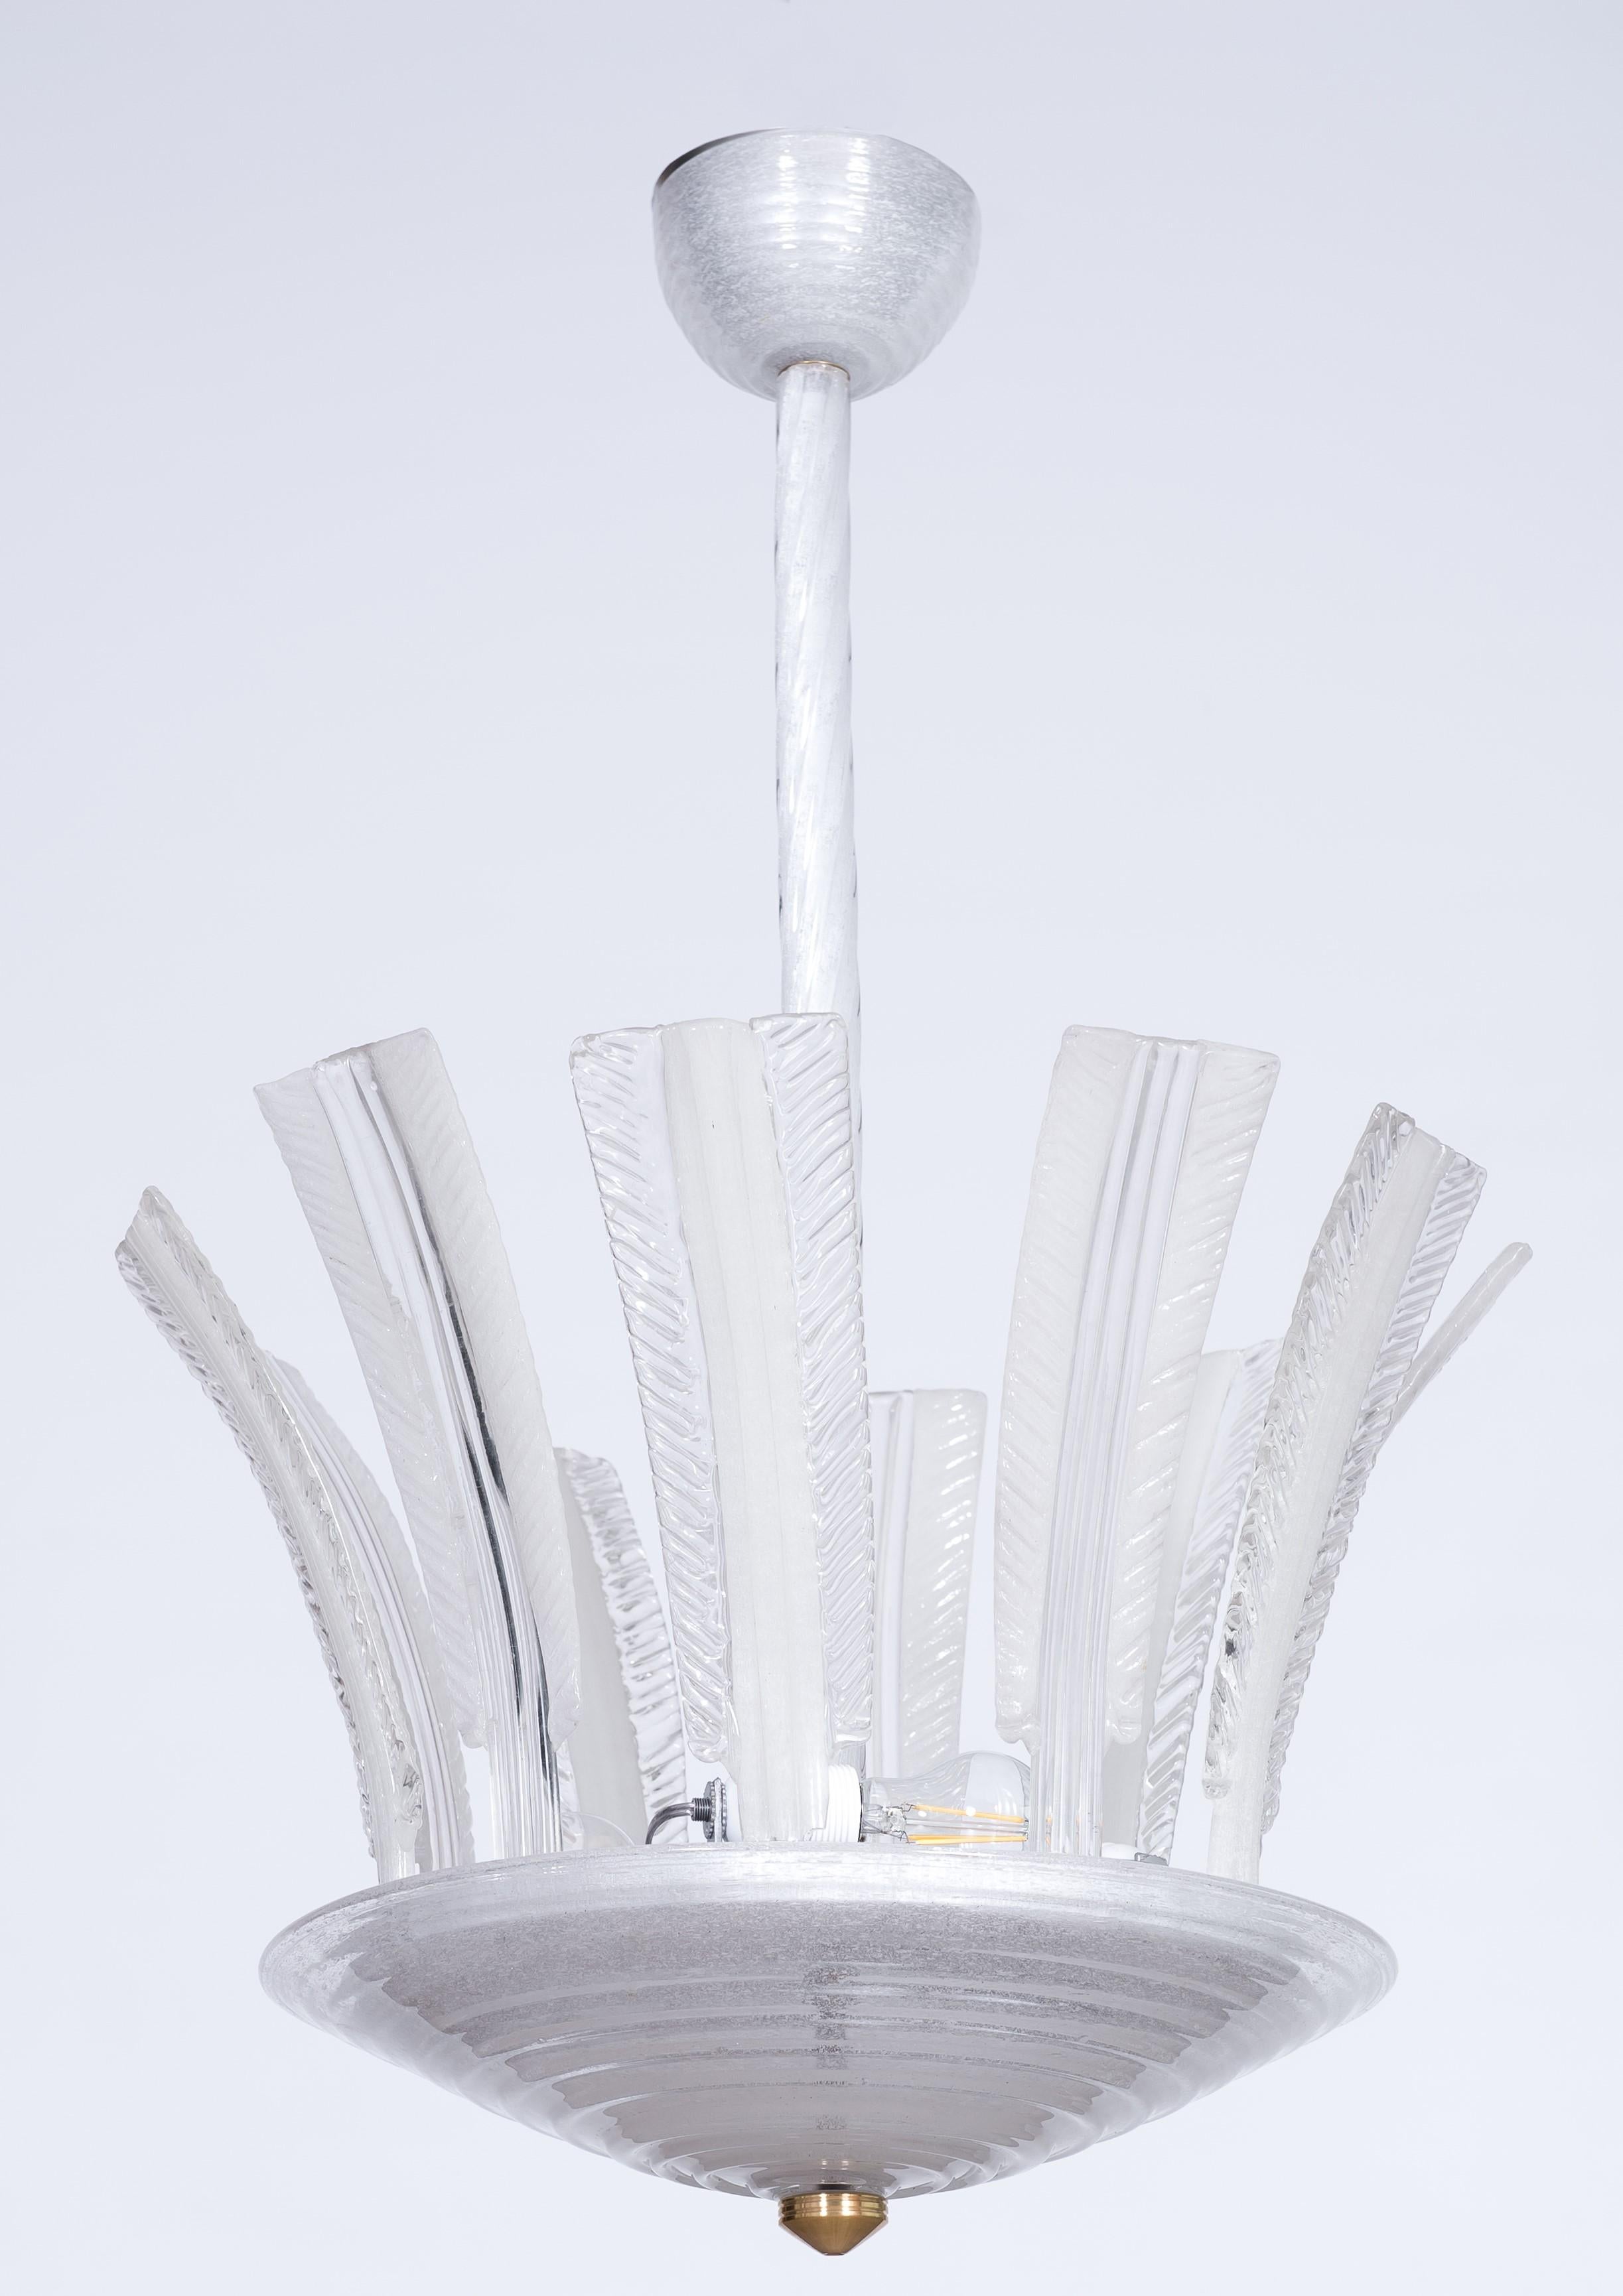 Murano Glass Puligoso chandelier with palm leaves attributed to Barovier 1950s.
Ten outward-leaning glass palm leaves are set on the central glass base, and surround the three central lights.
The diameter measures 39.4